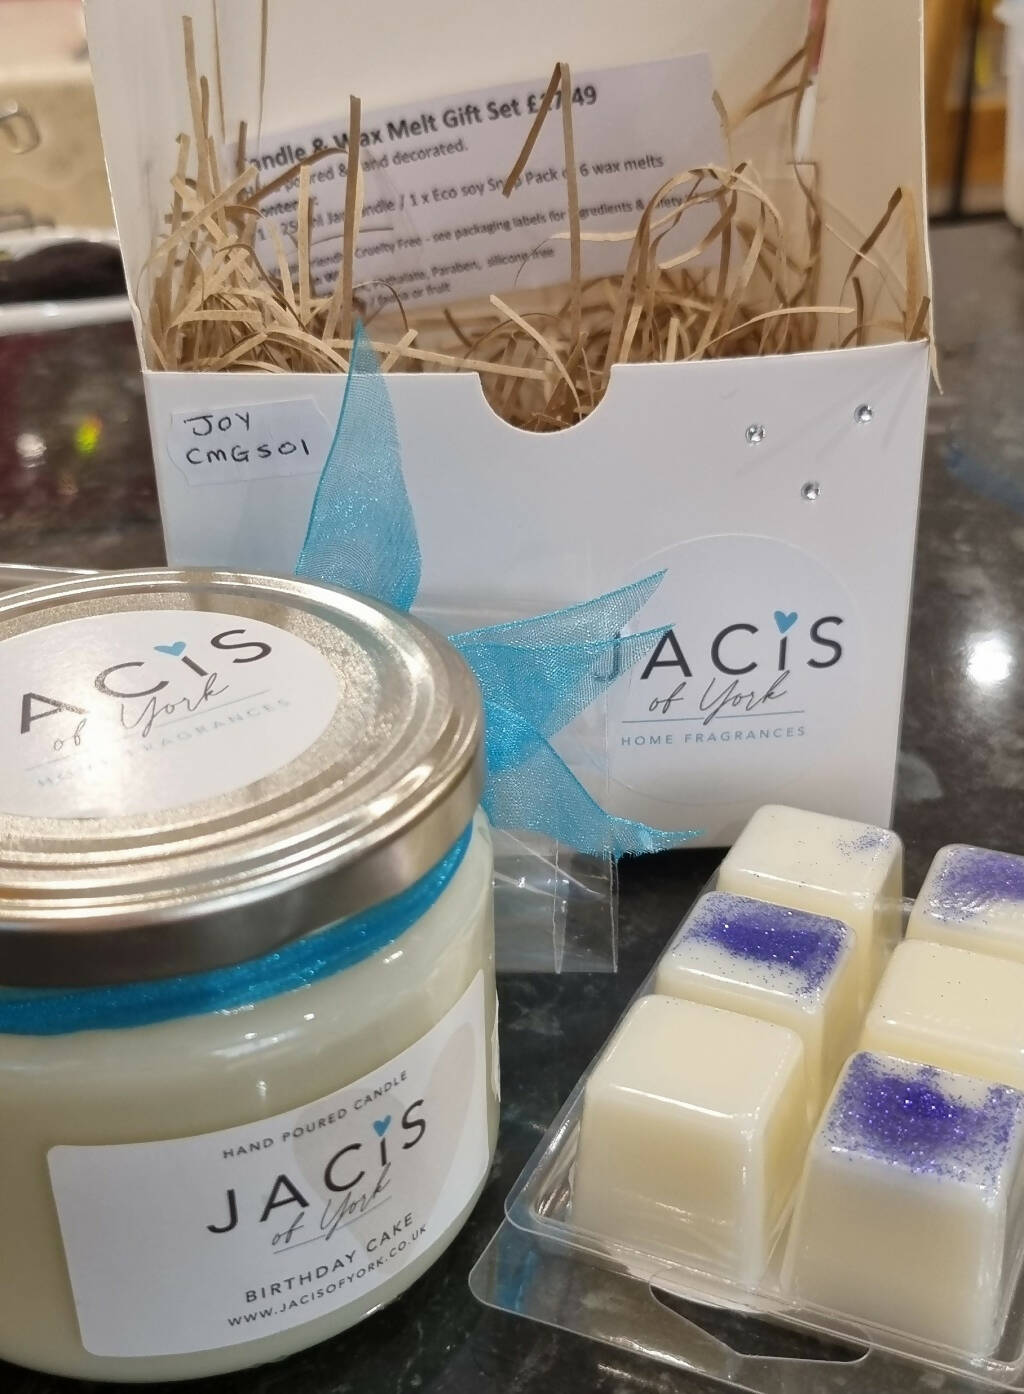 Jacis of York - A 250ML Scented Candle Plus Pack of 6 Wax Melts With FREE Gift Box